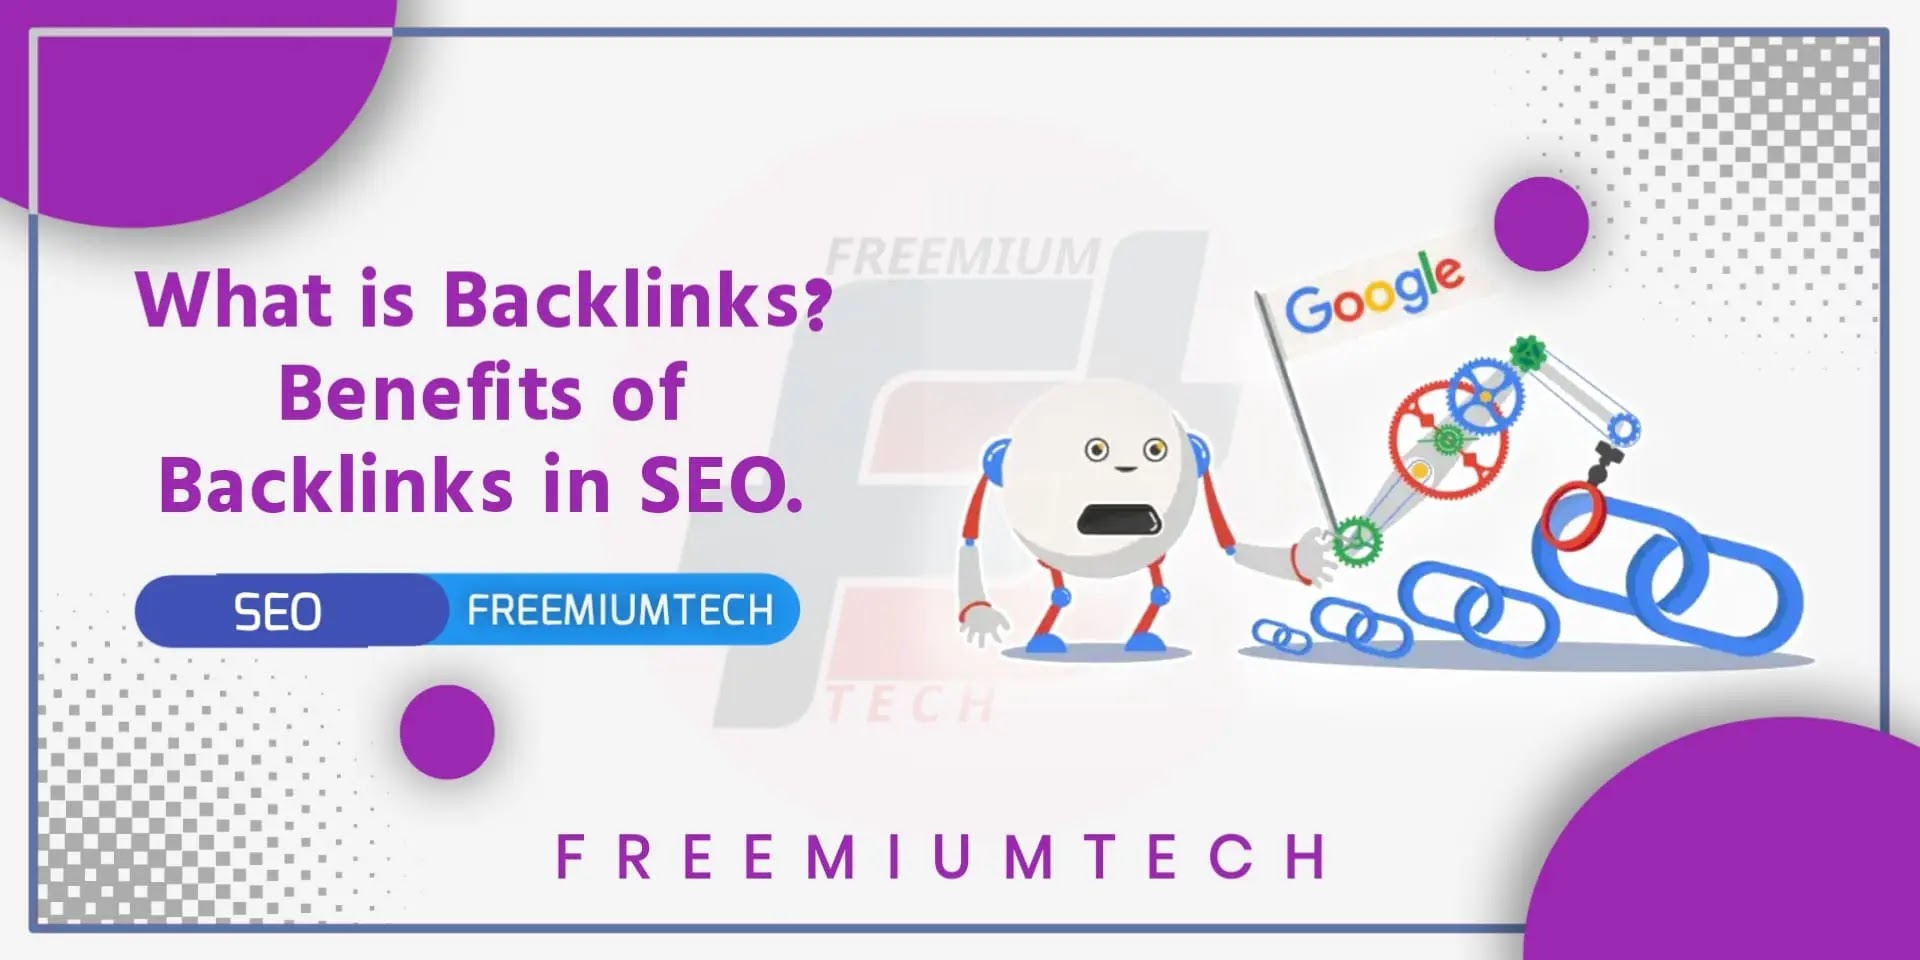 What is Backlinks? Benefits of Backlinks in SEO